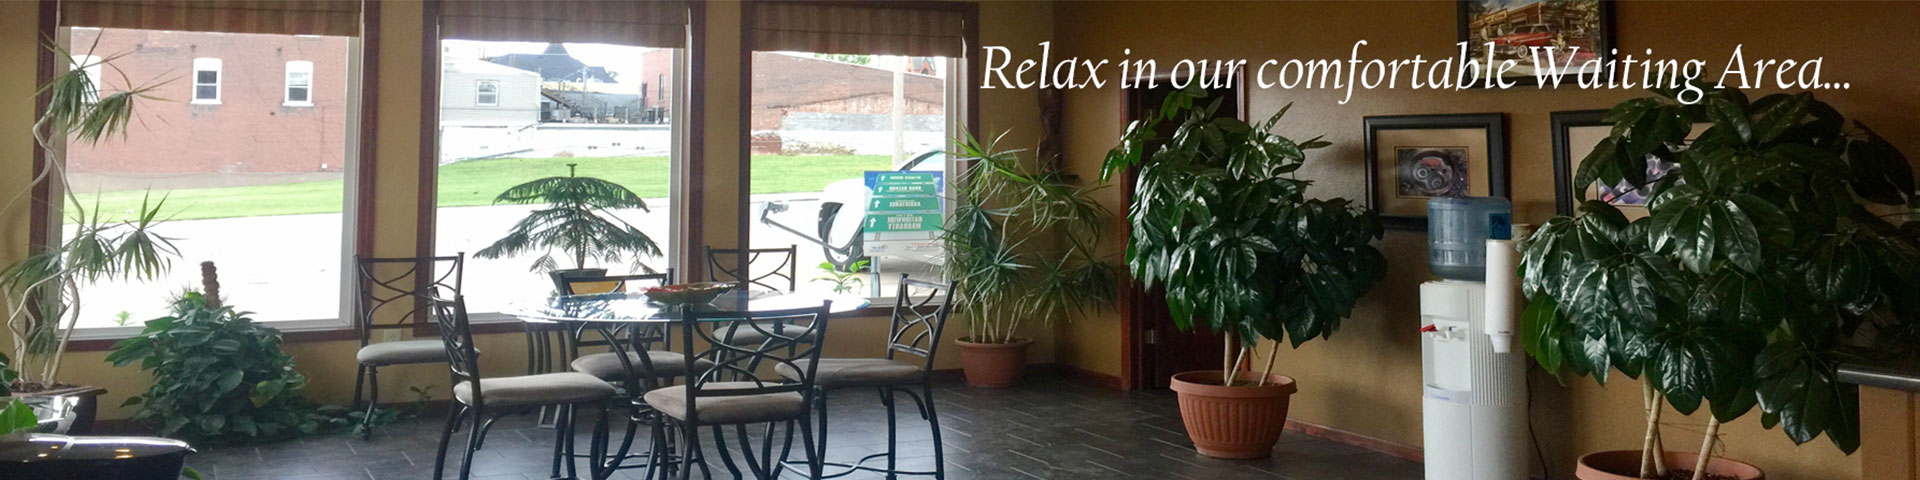 Relax in our comfortable Waiting Area | Griffin Muffler & Brake Center LLC